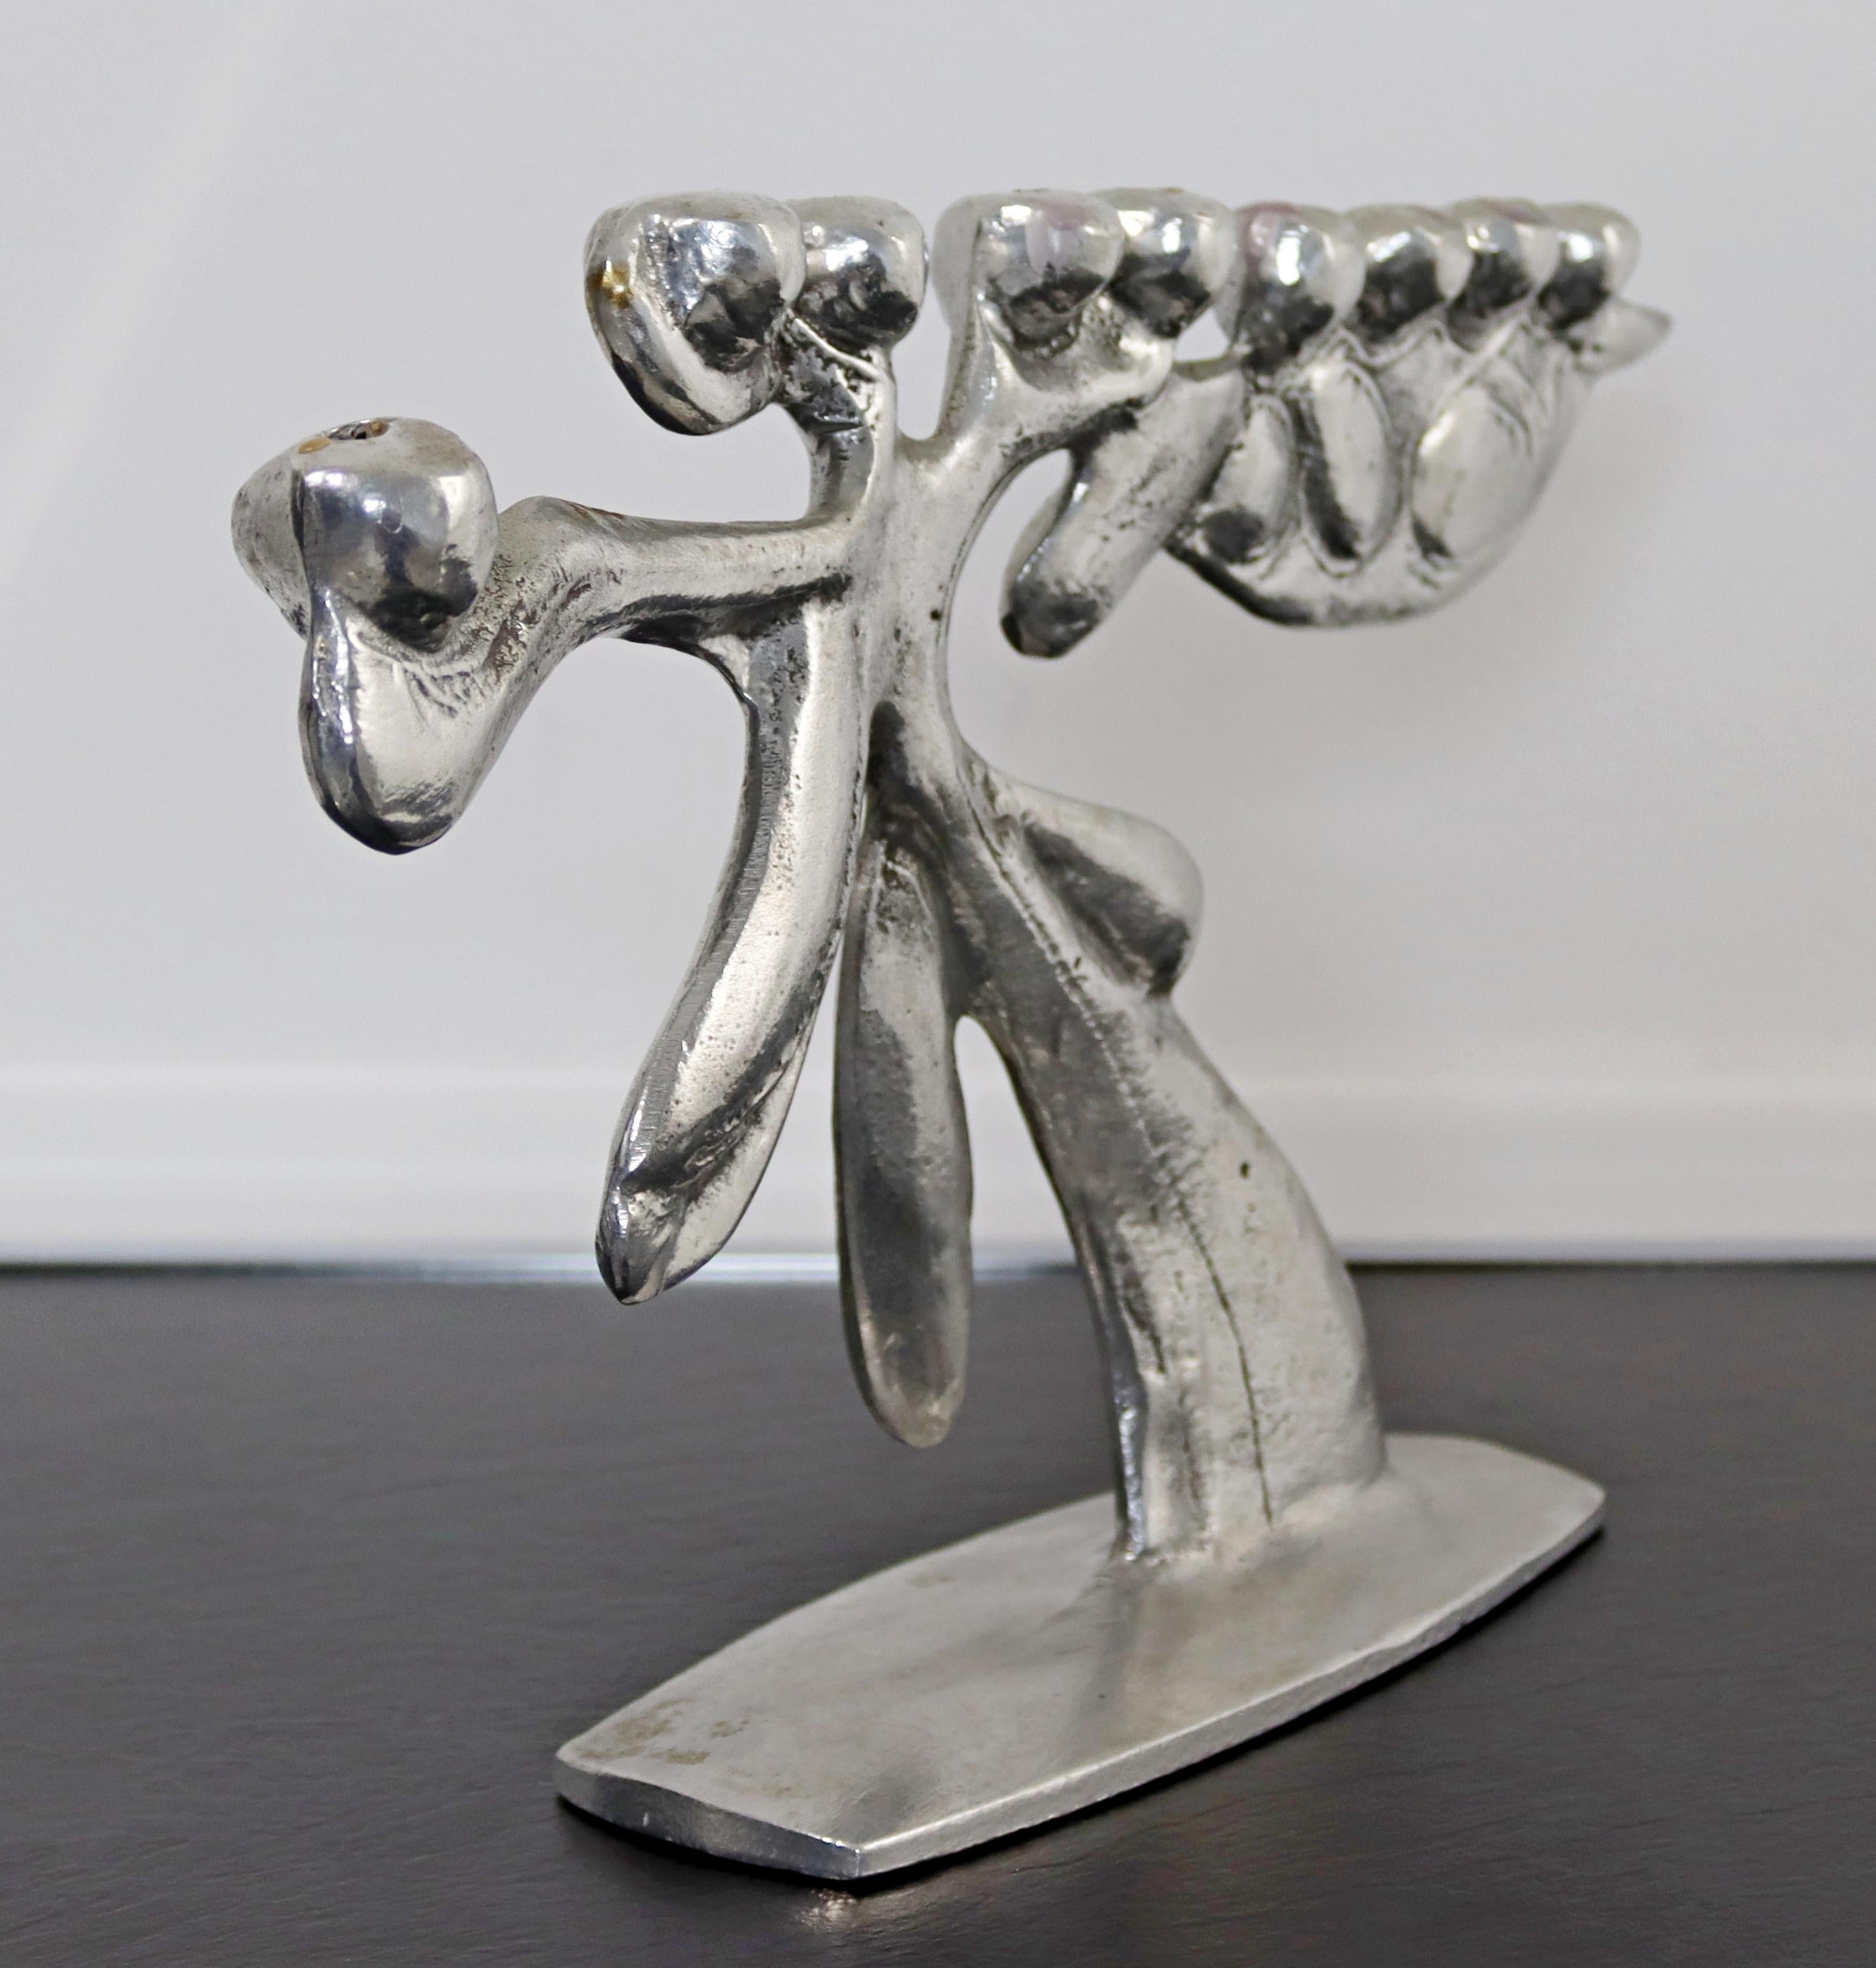 For your consideration is a marvelous, cast aluminum menorah or candelabra, signed by Donald Drumm, circa the 1960s. In excellent vintage condition. The dimensions are 15